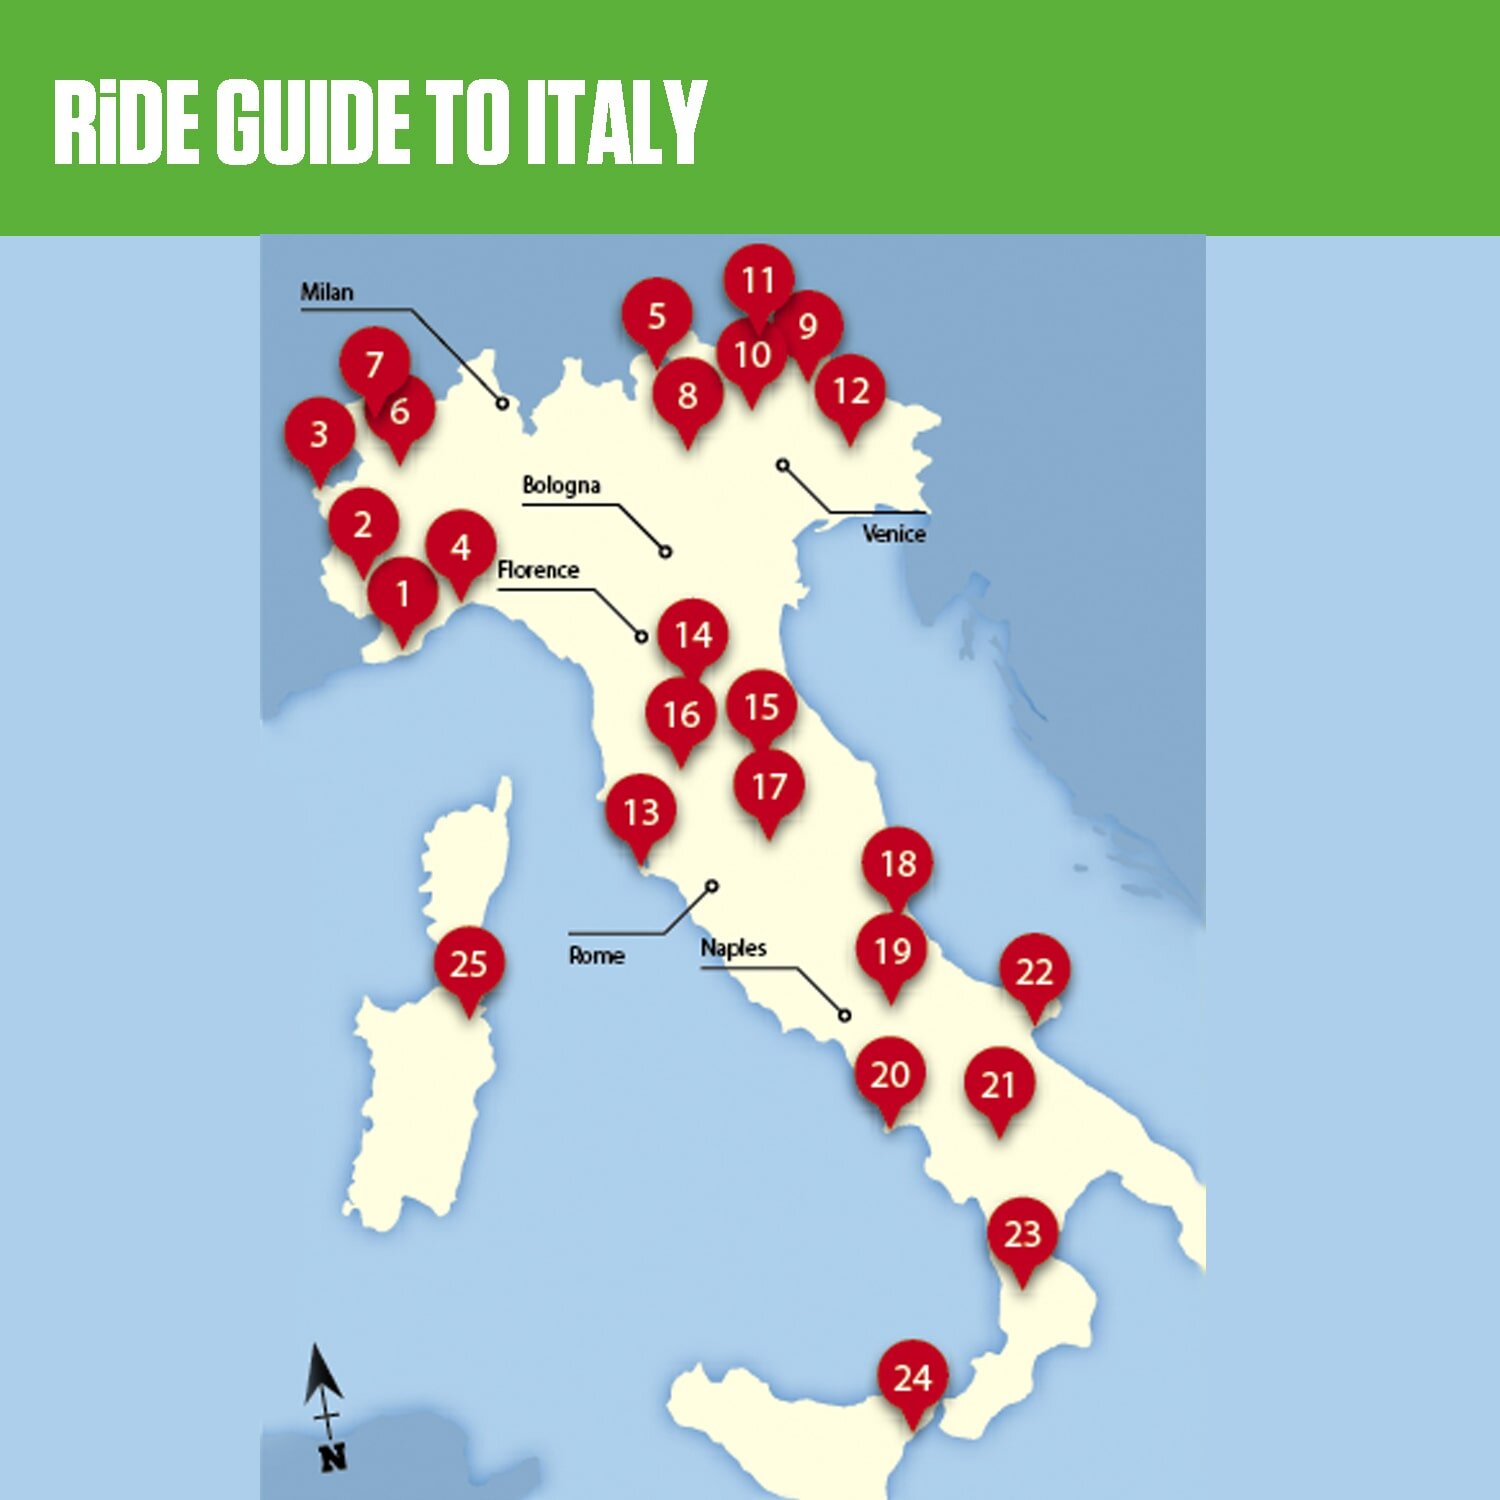 RiDE Guide to motorcycling touring in Italy